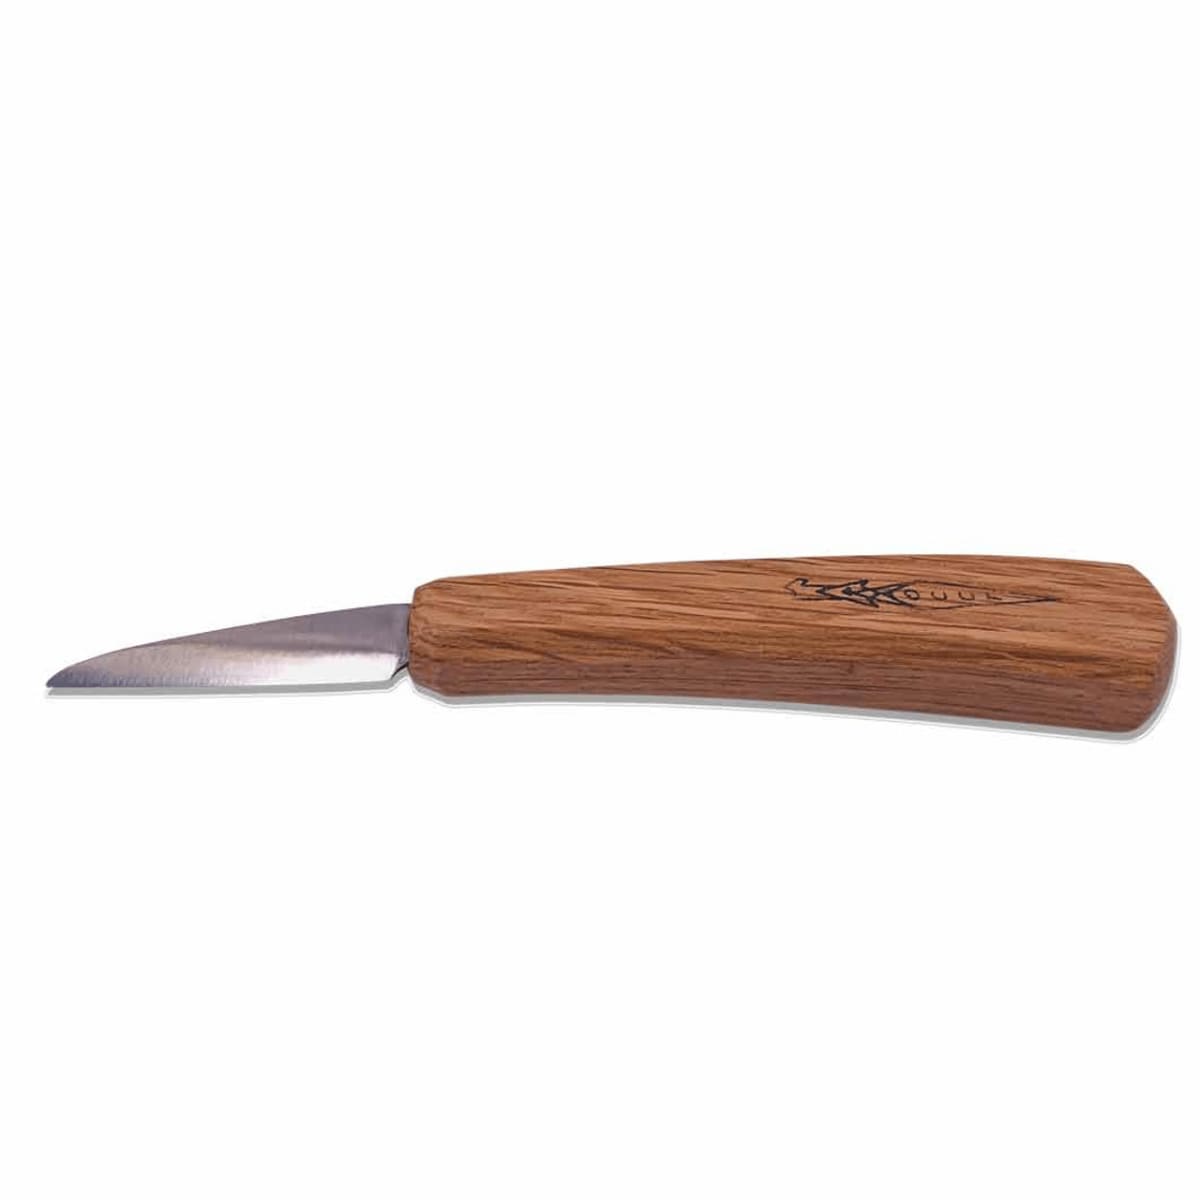 Straight Knife Wide Blade - The Best Wood Carving Knives - A Definitive ...